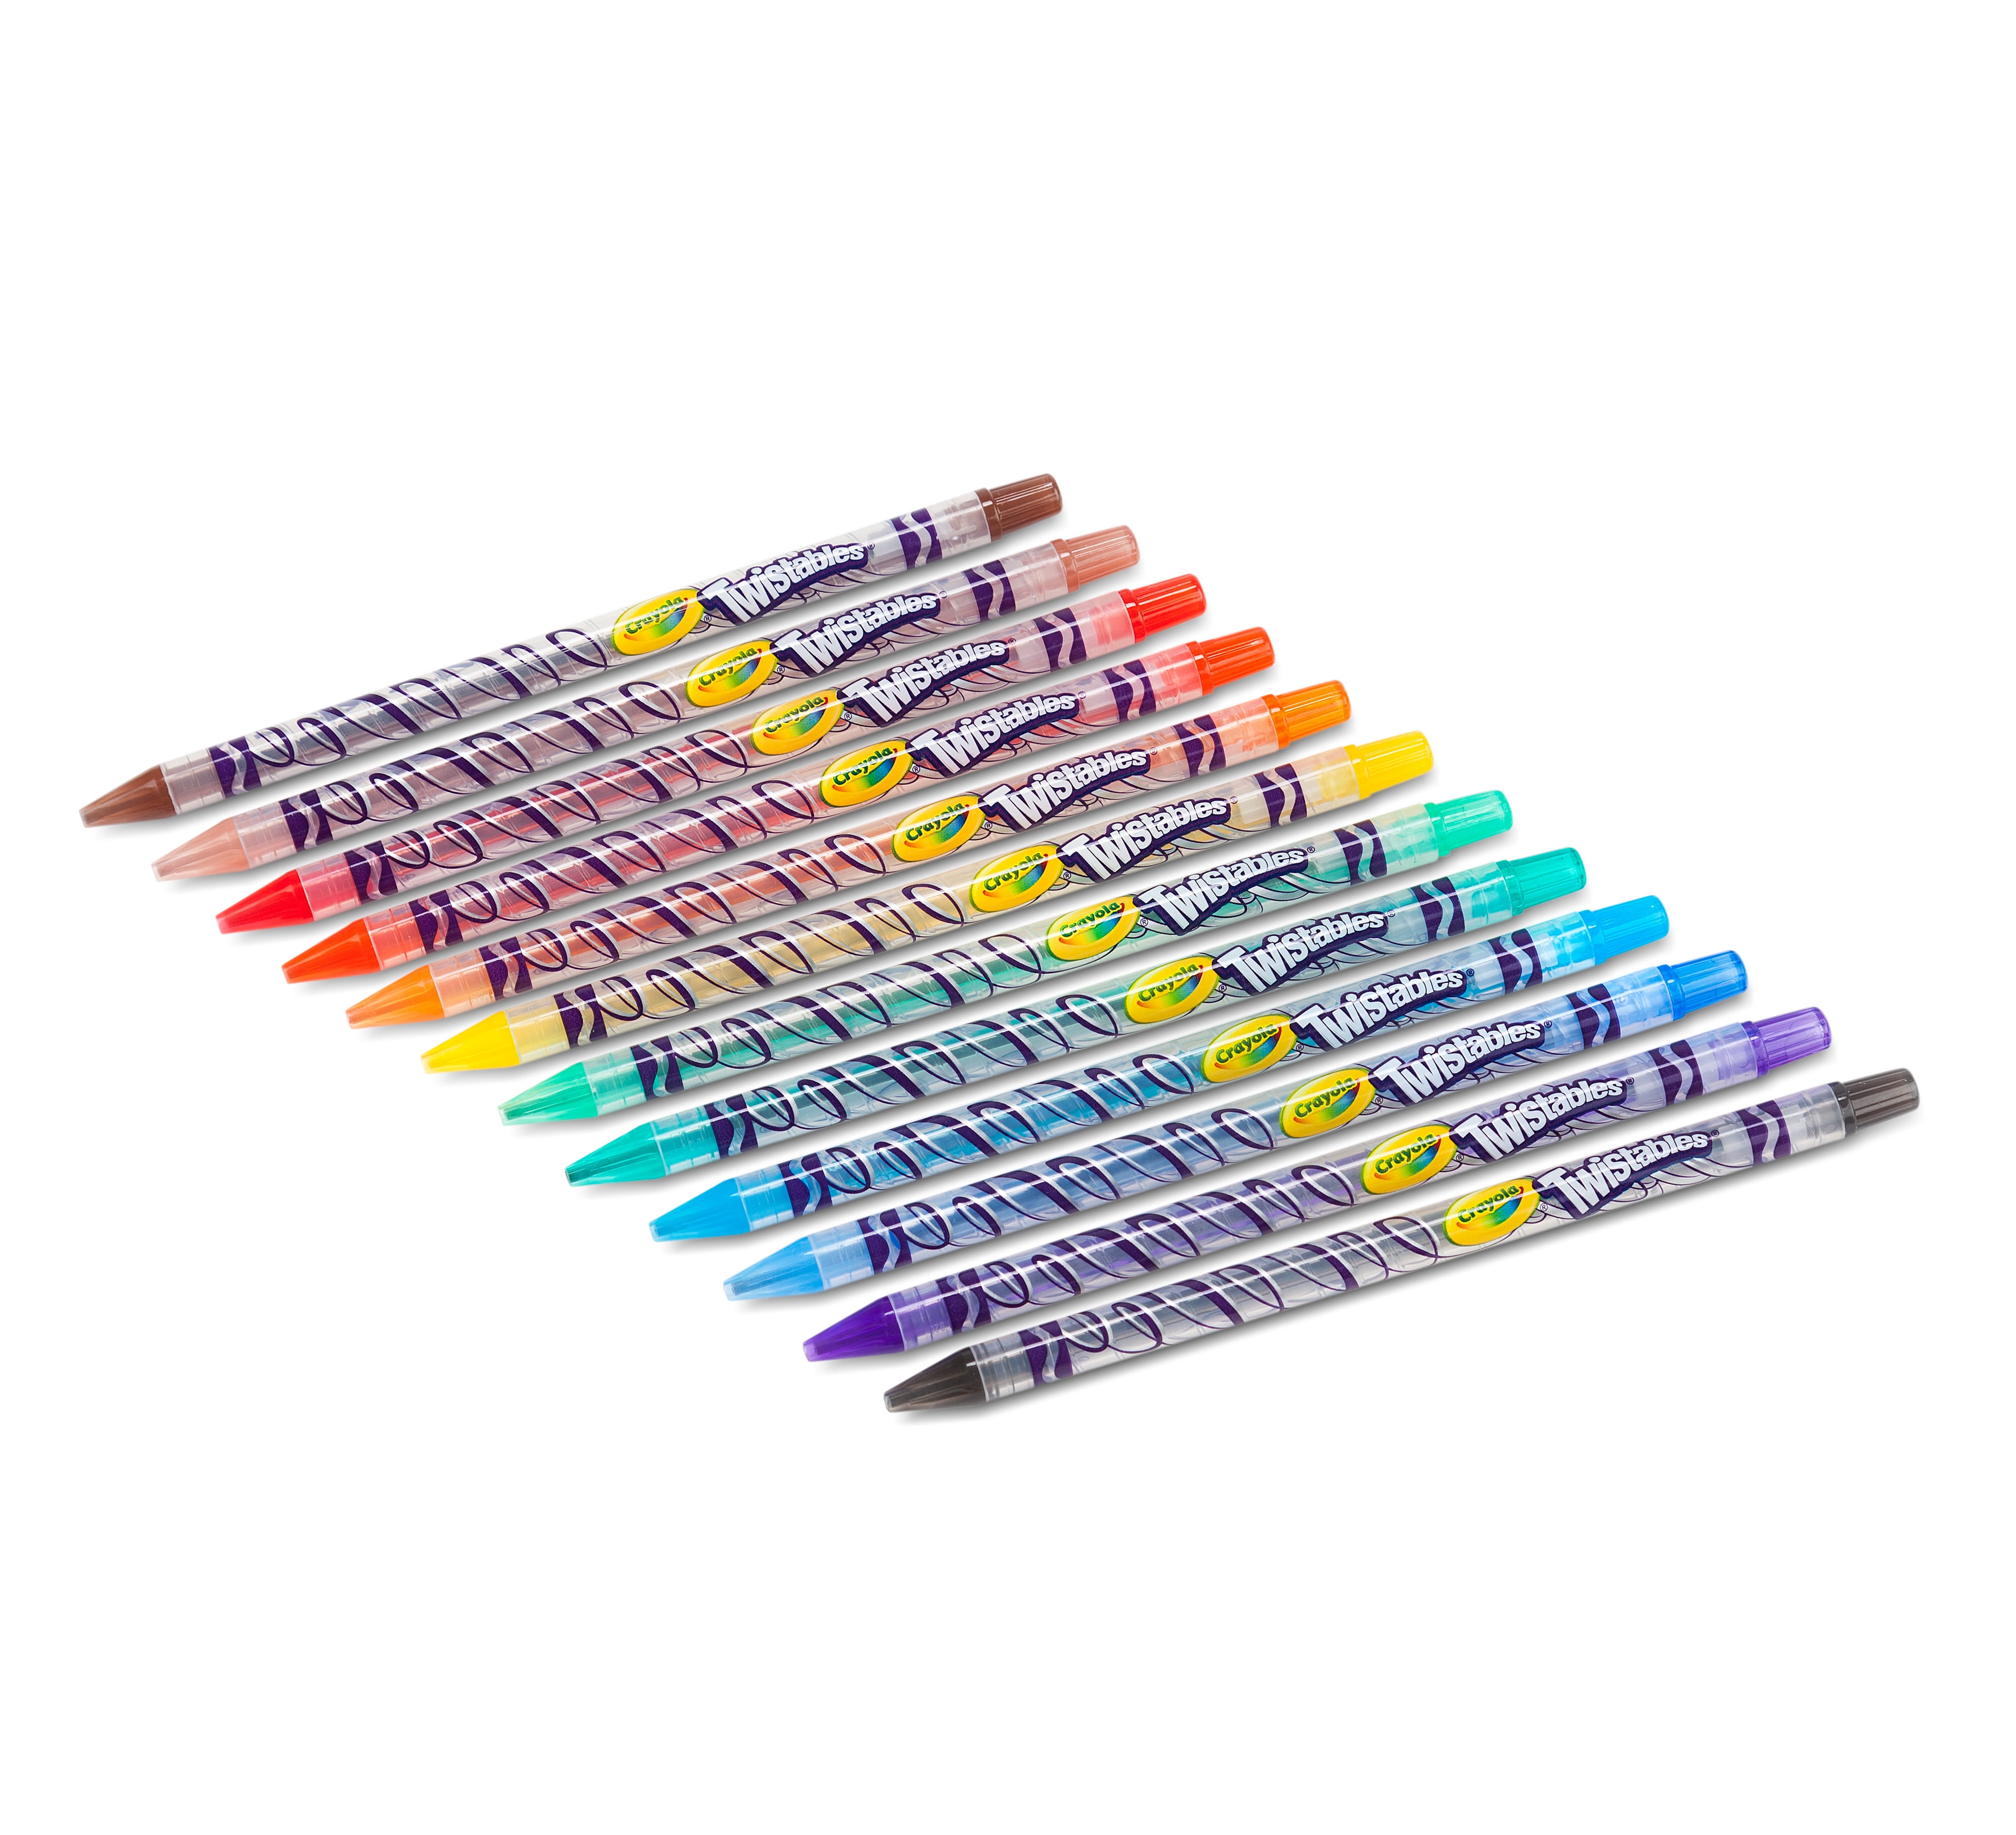 Crayola Twistables Colored Pencils, Always Sharp, Art Tools for